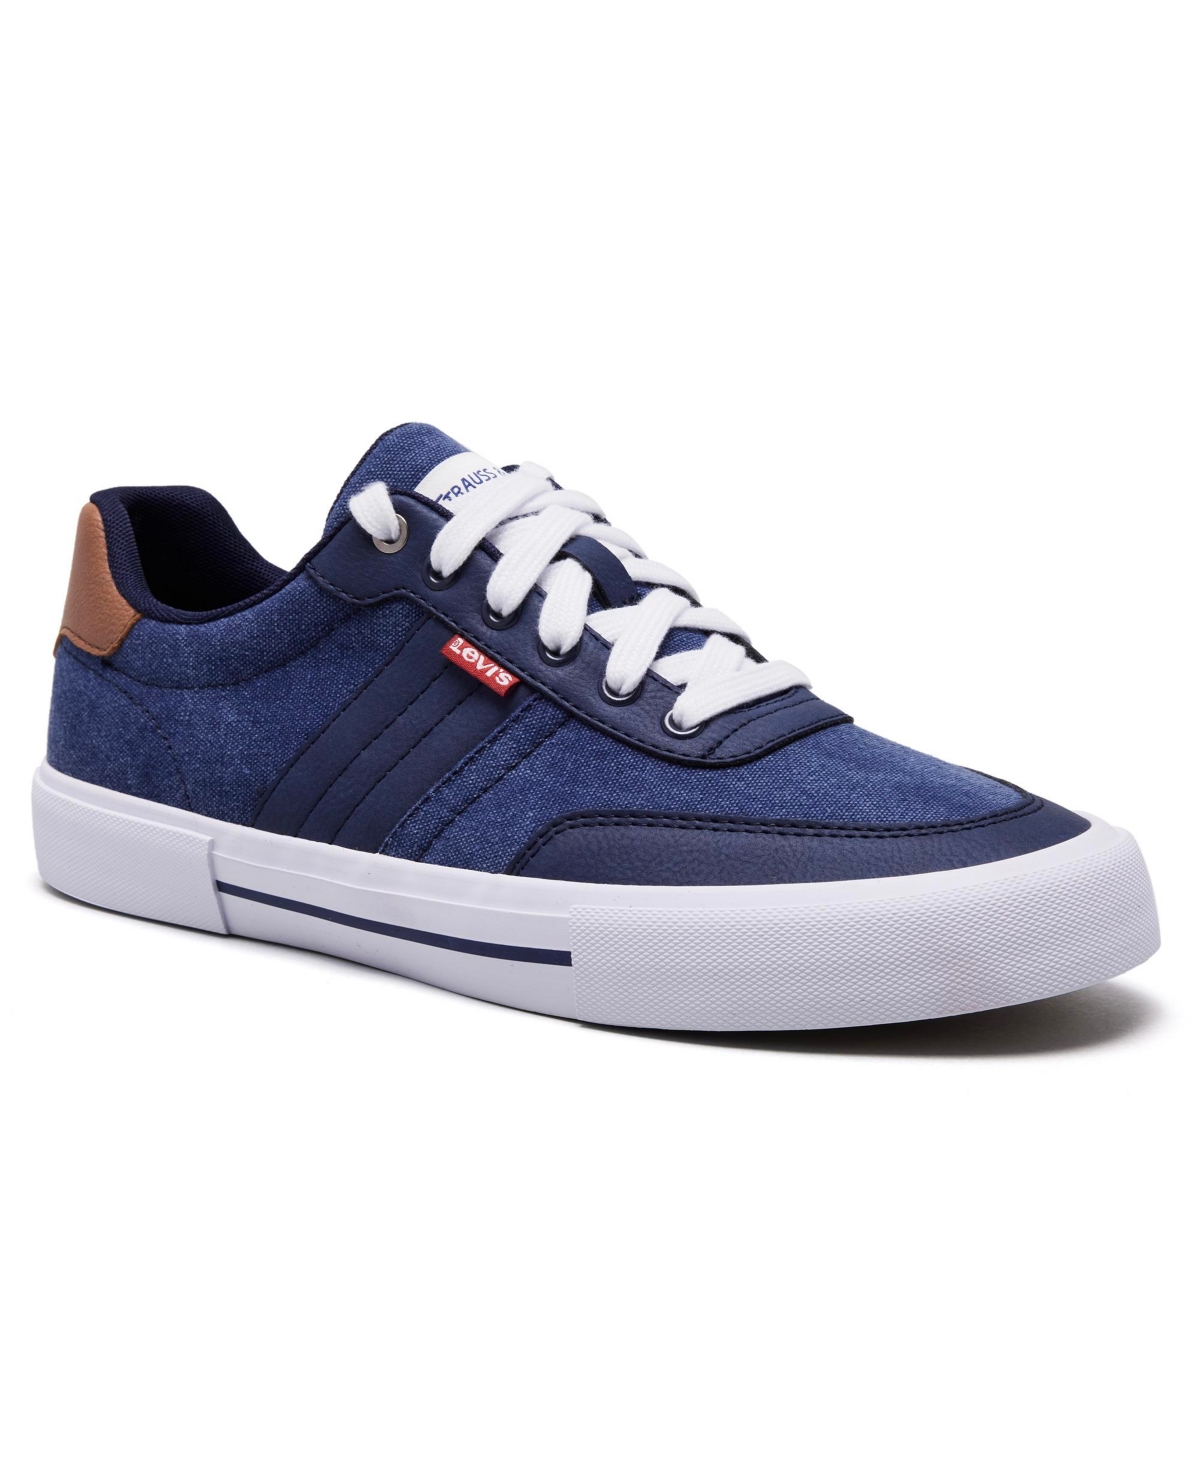 Men's Munro Athletic Lace Up Sneakers - Navy, Blue